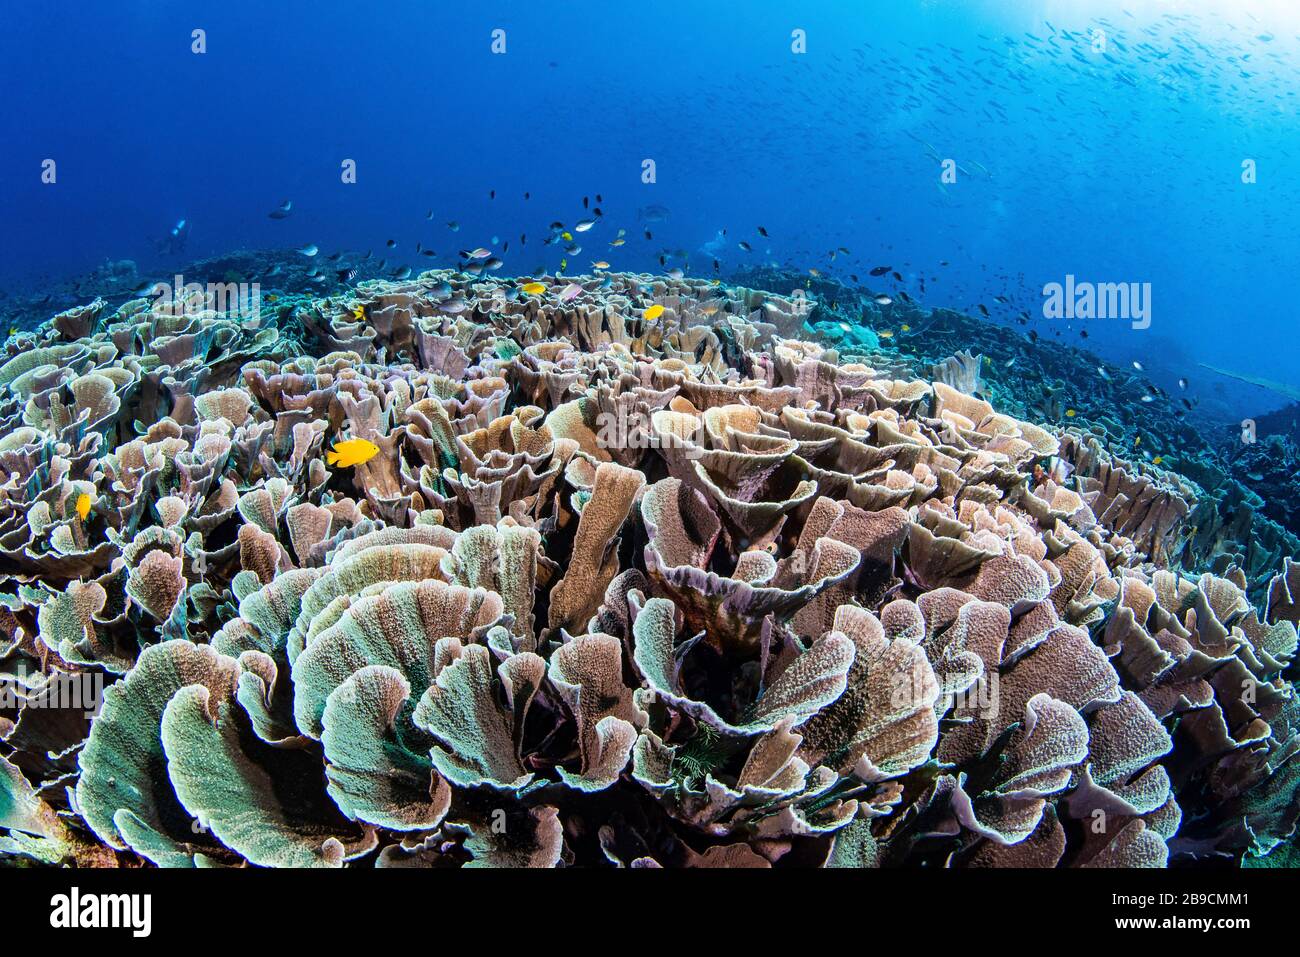 A field of cabbage leaf coral supports many reef fish. Stock Photo